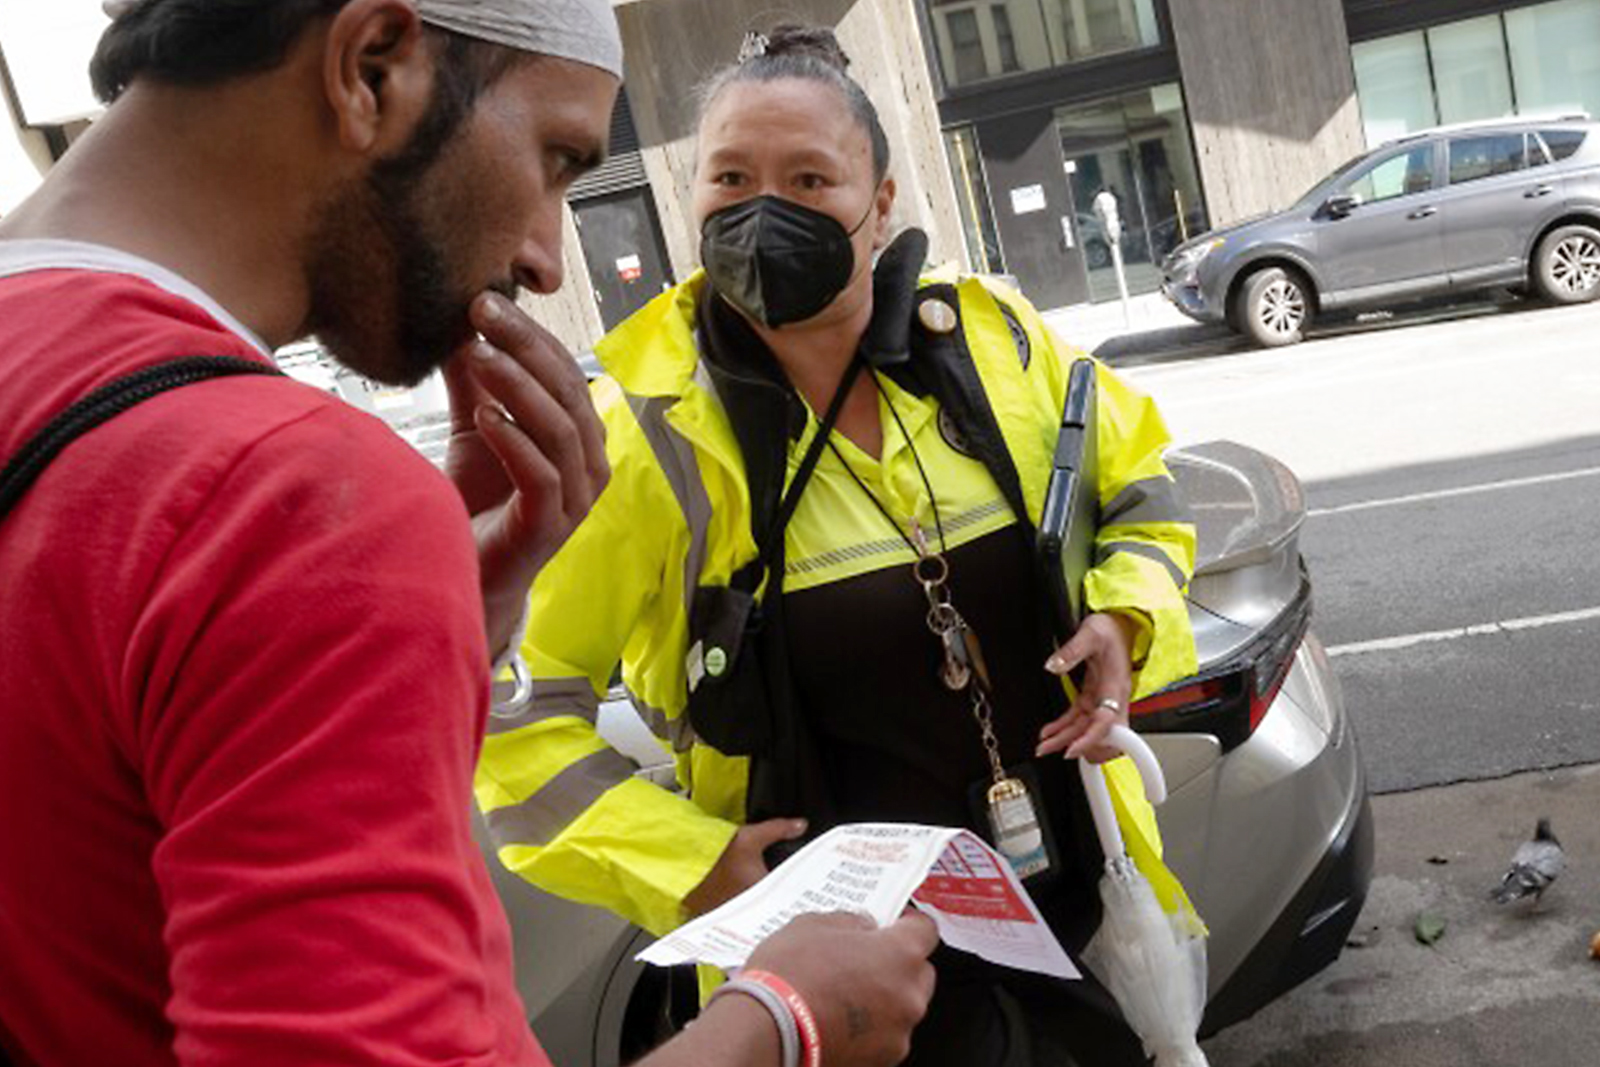 A person in a bright yellow safety jacket and black mask speaks with another person in a red shirt on a city street. They're discussing a document the second person is holding.